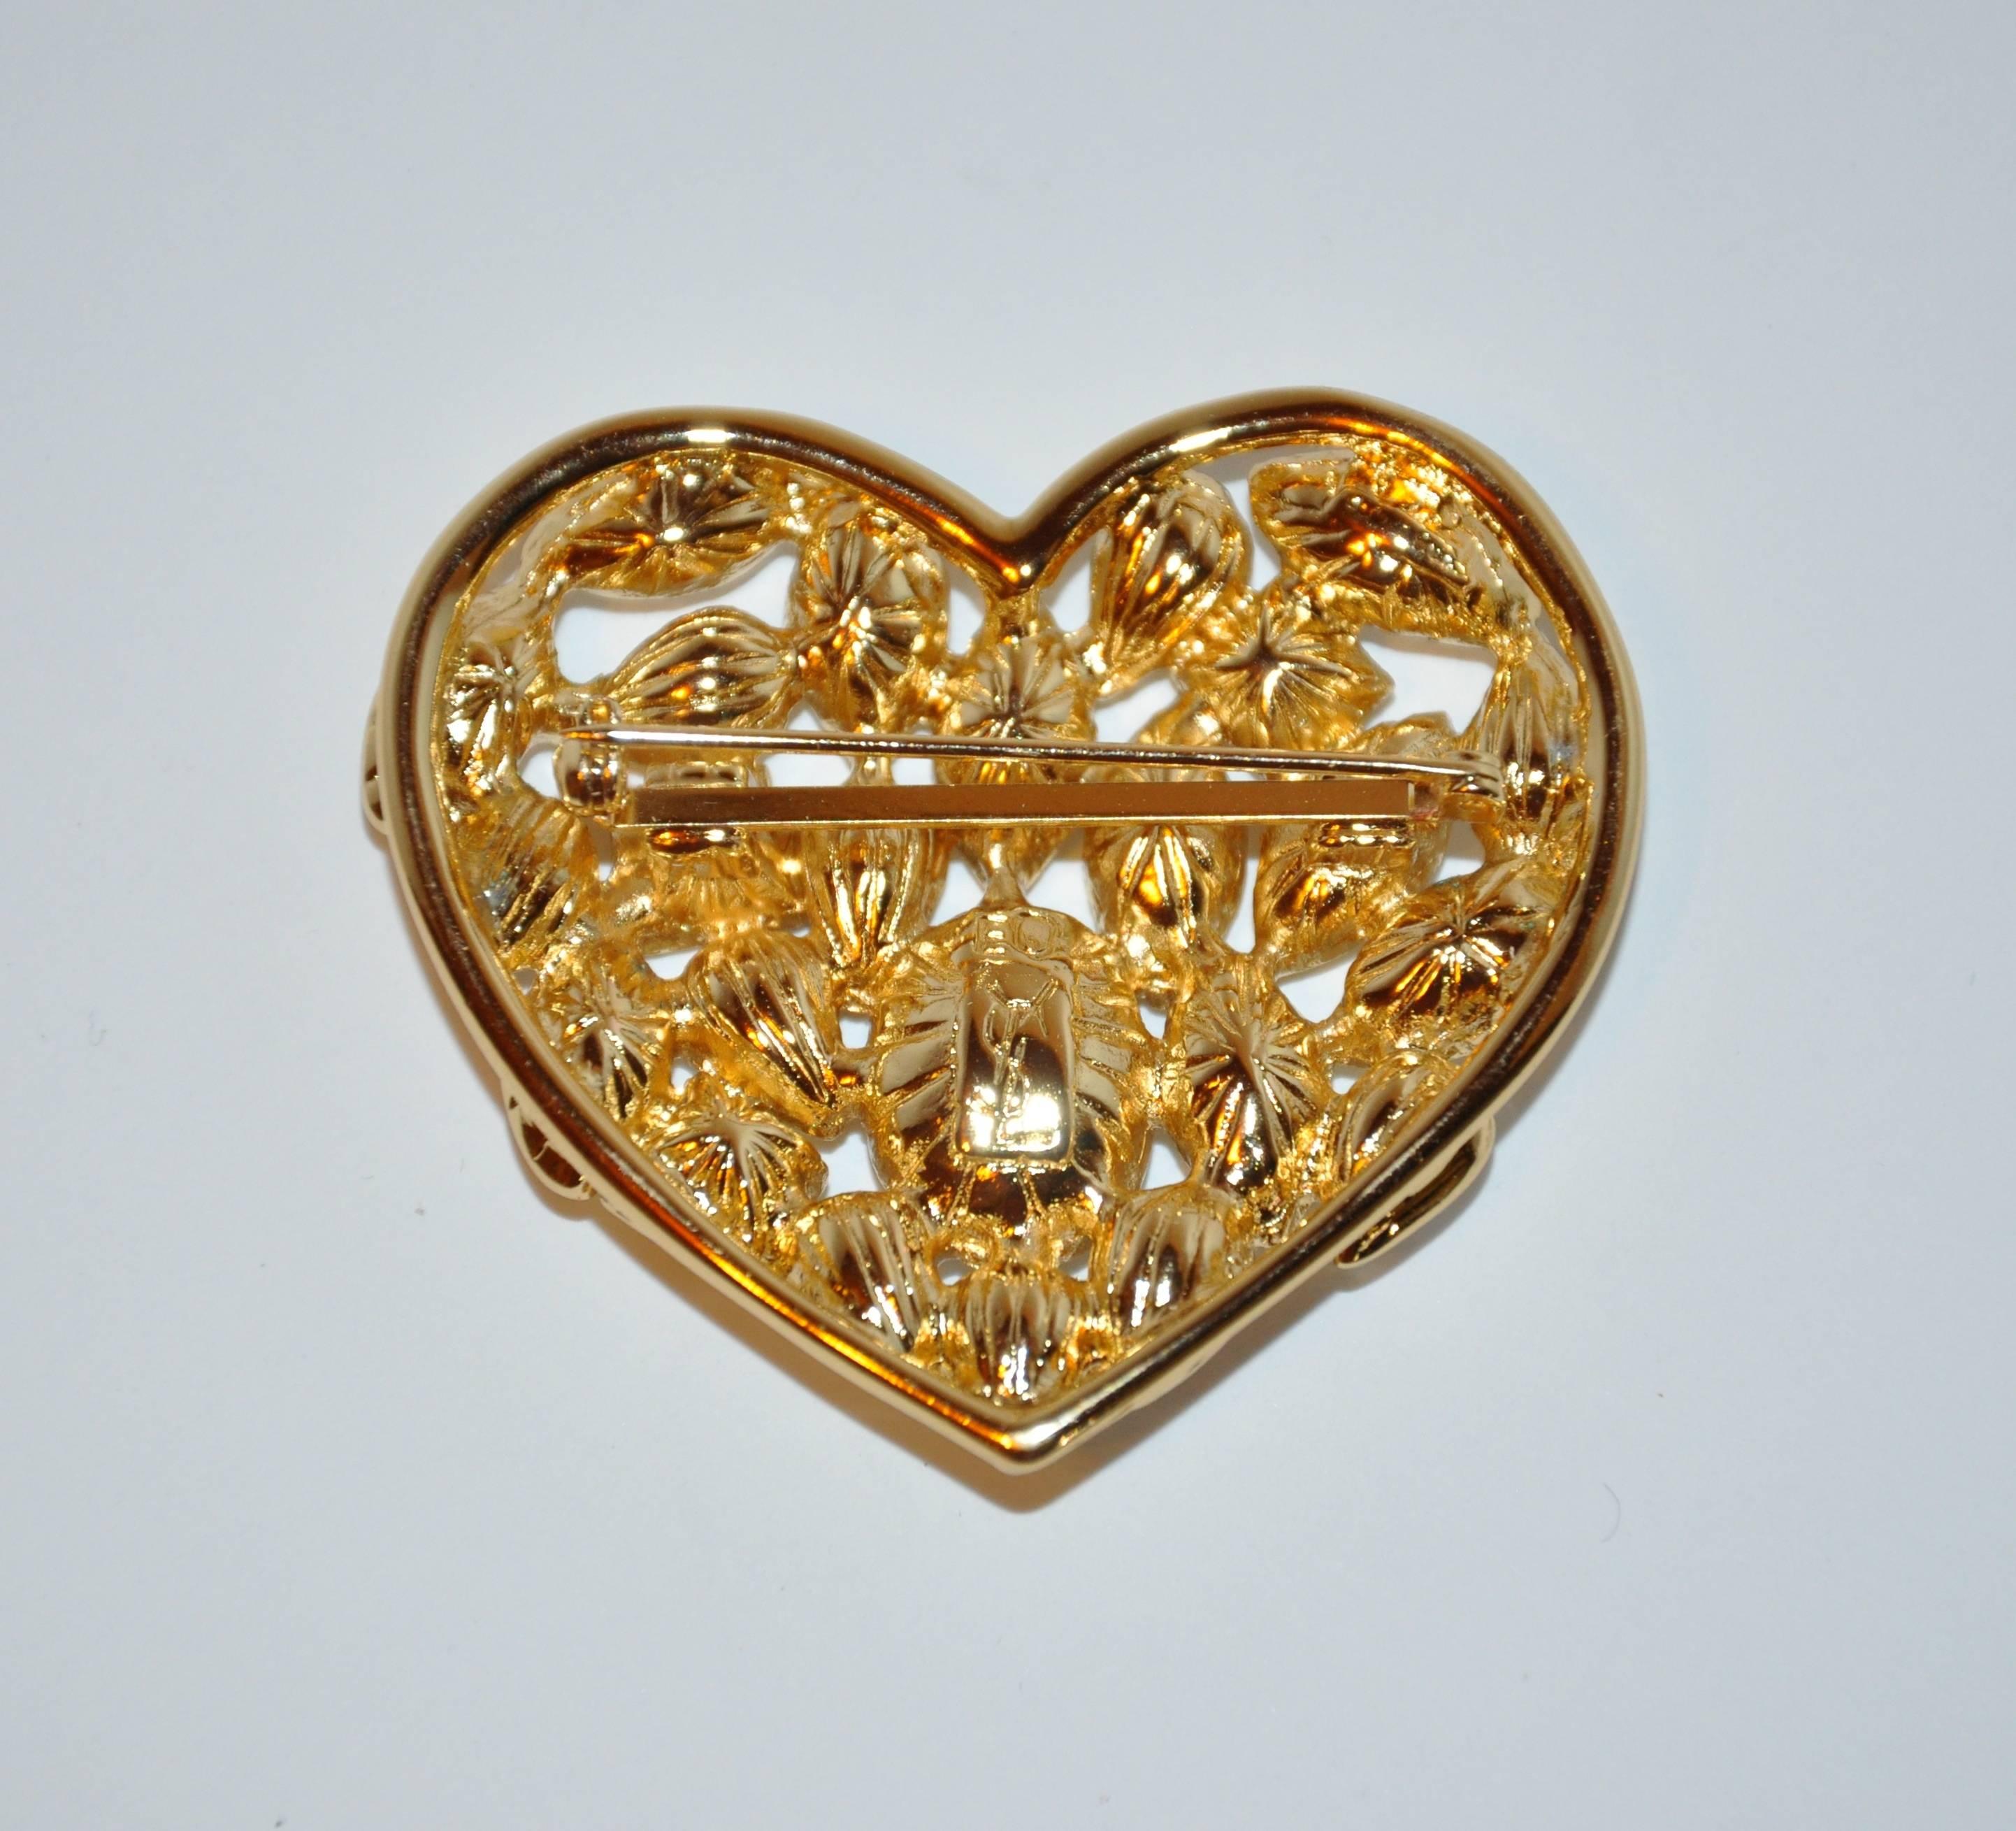         Yves Saint Laurent wonderfully elegant yet whimsical "Hearts to Hearts" huge multi-rhinestone brooch set in gilded gold hardware measures 2" in width as well as in length. Made in France, with original box.